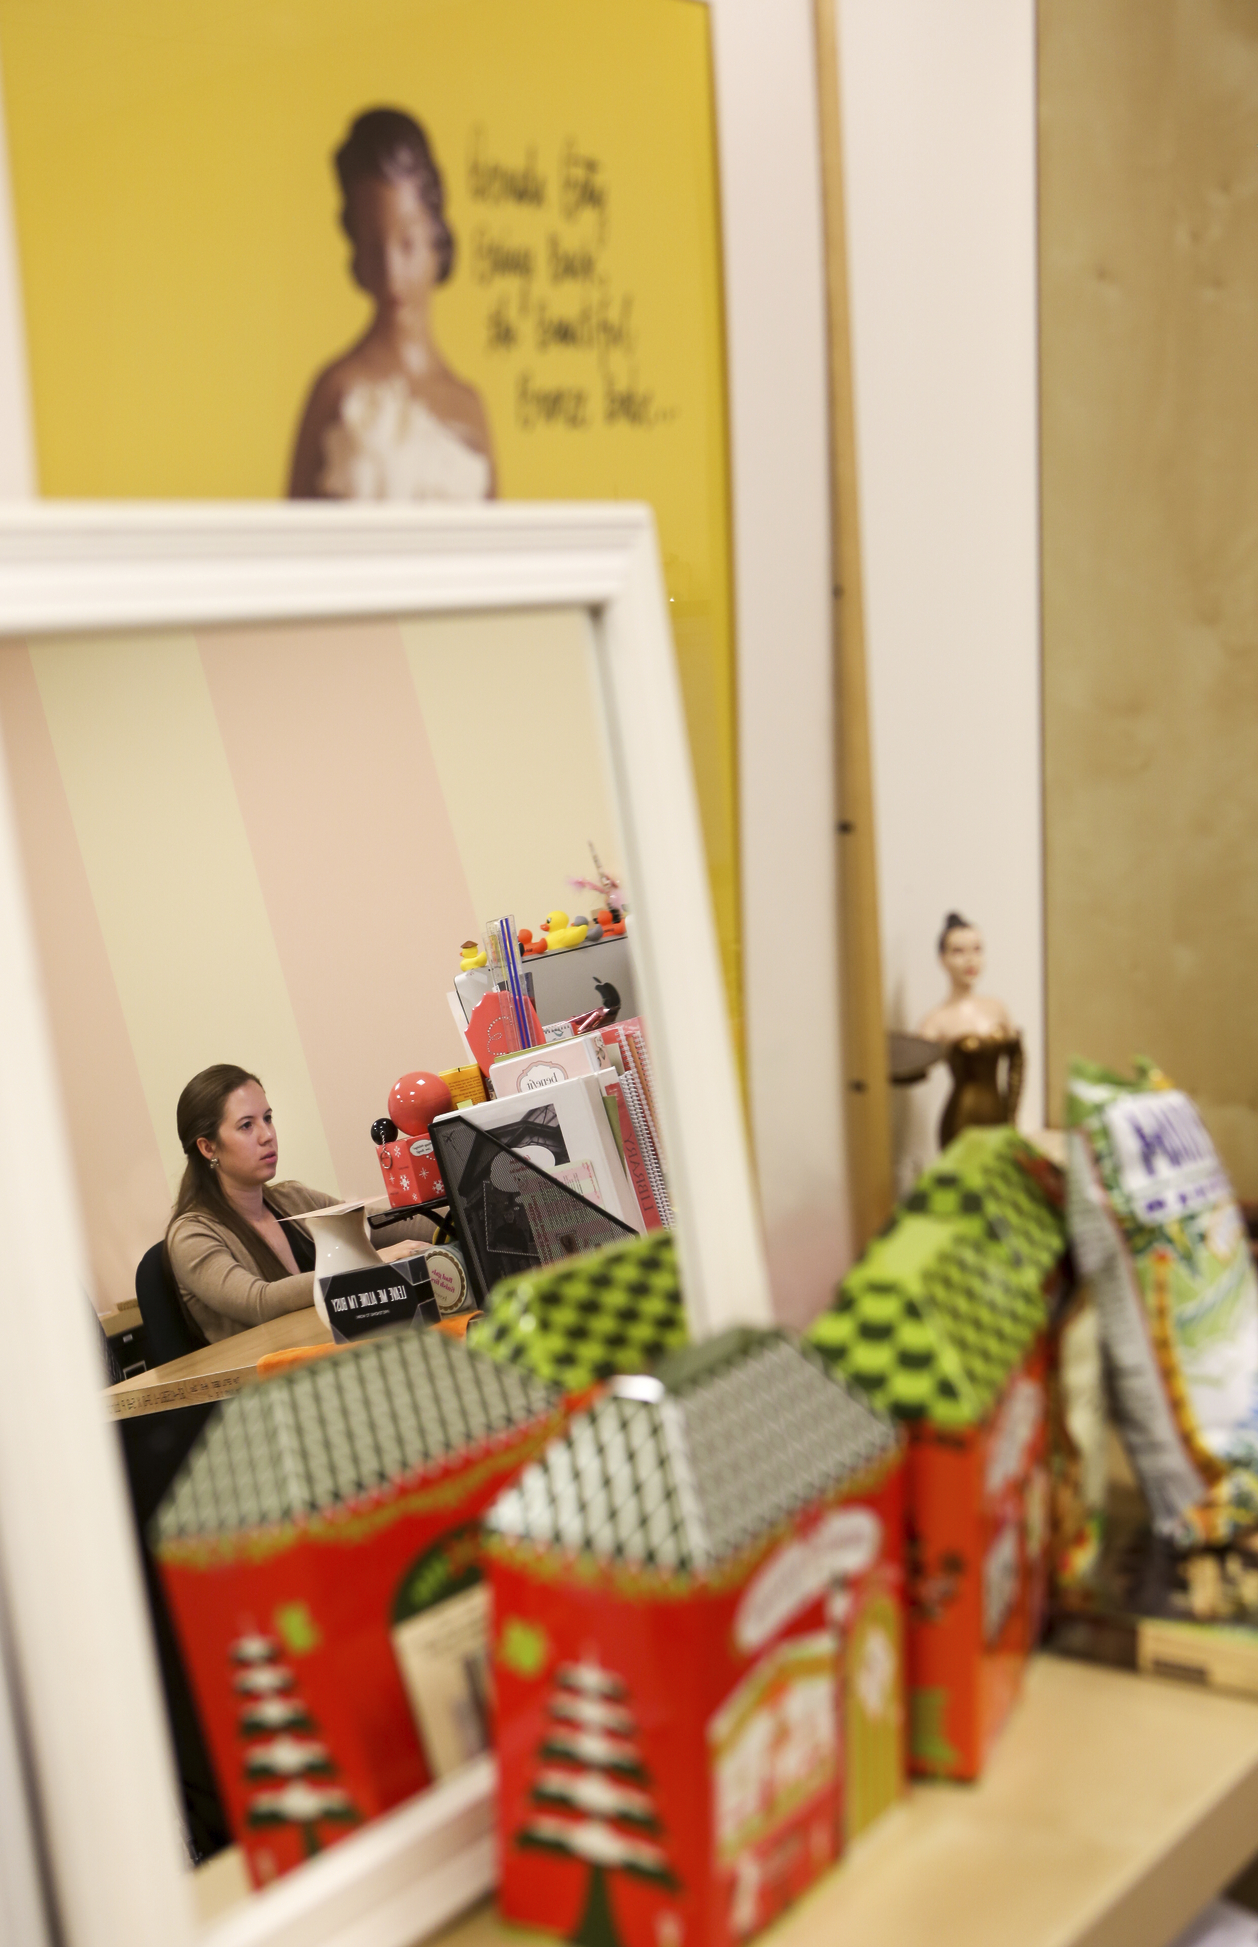 Office Space: Benefit Cosmetics office is playful in pink